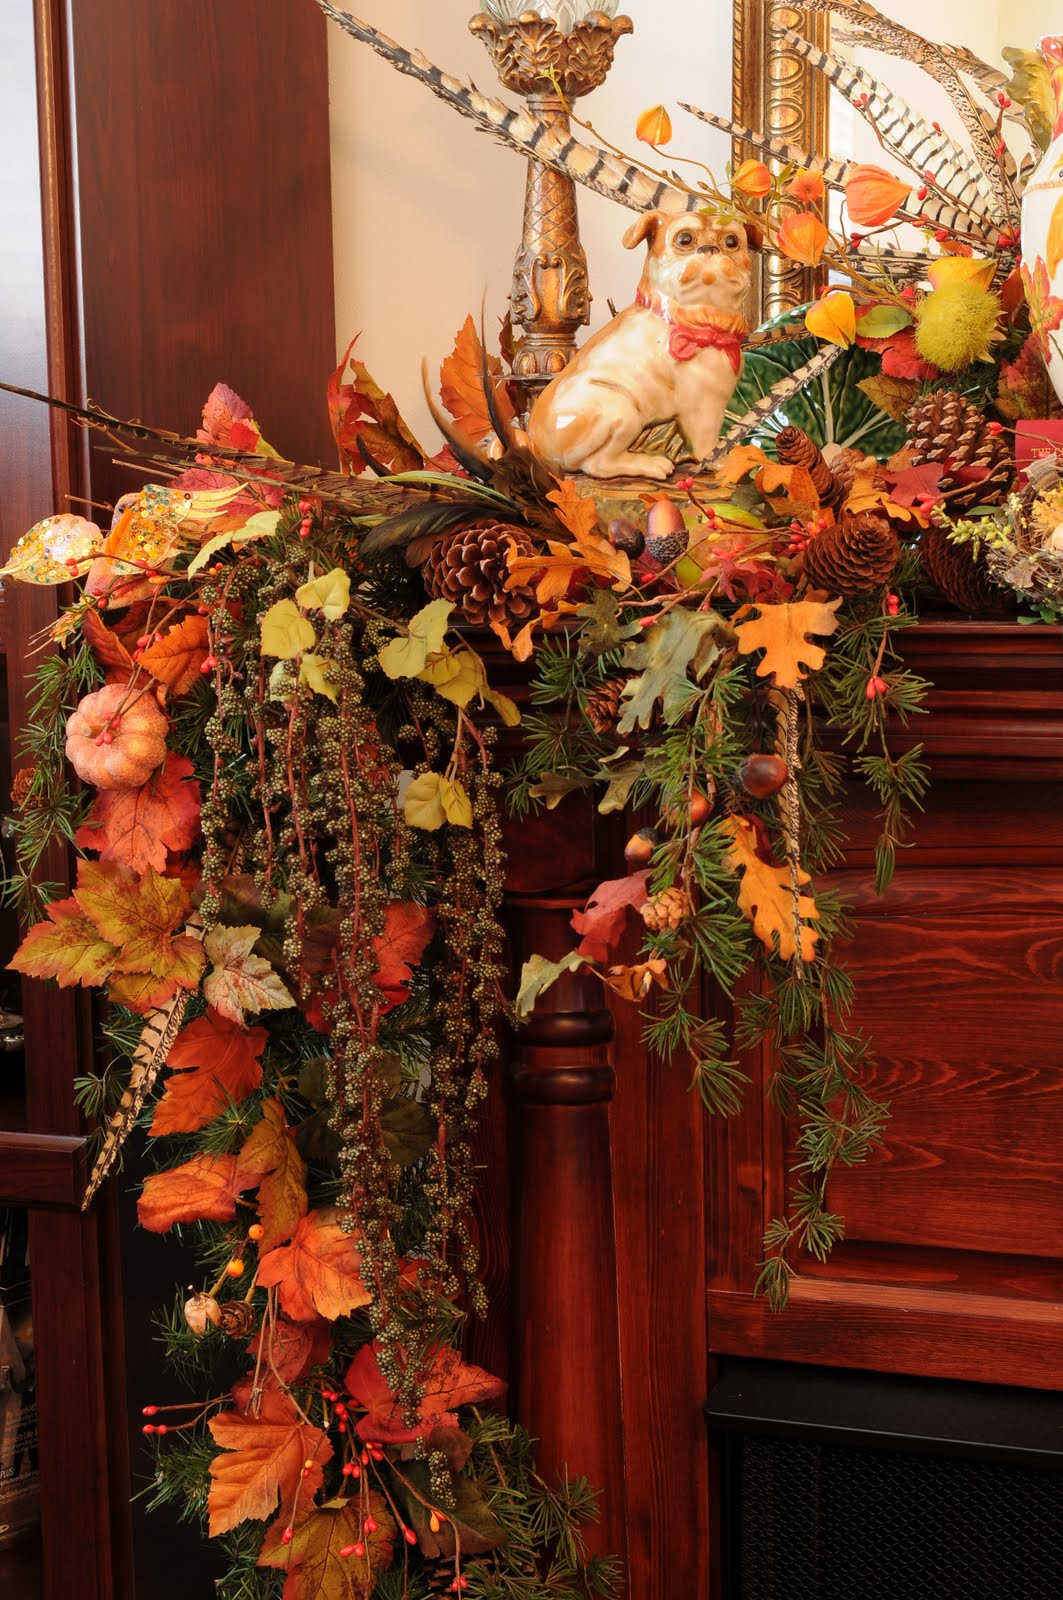 Fall Decor For Fireplace Mantel
 Sweet Designs Fall Fireplace Mantel decorating